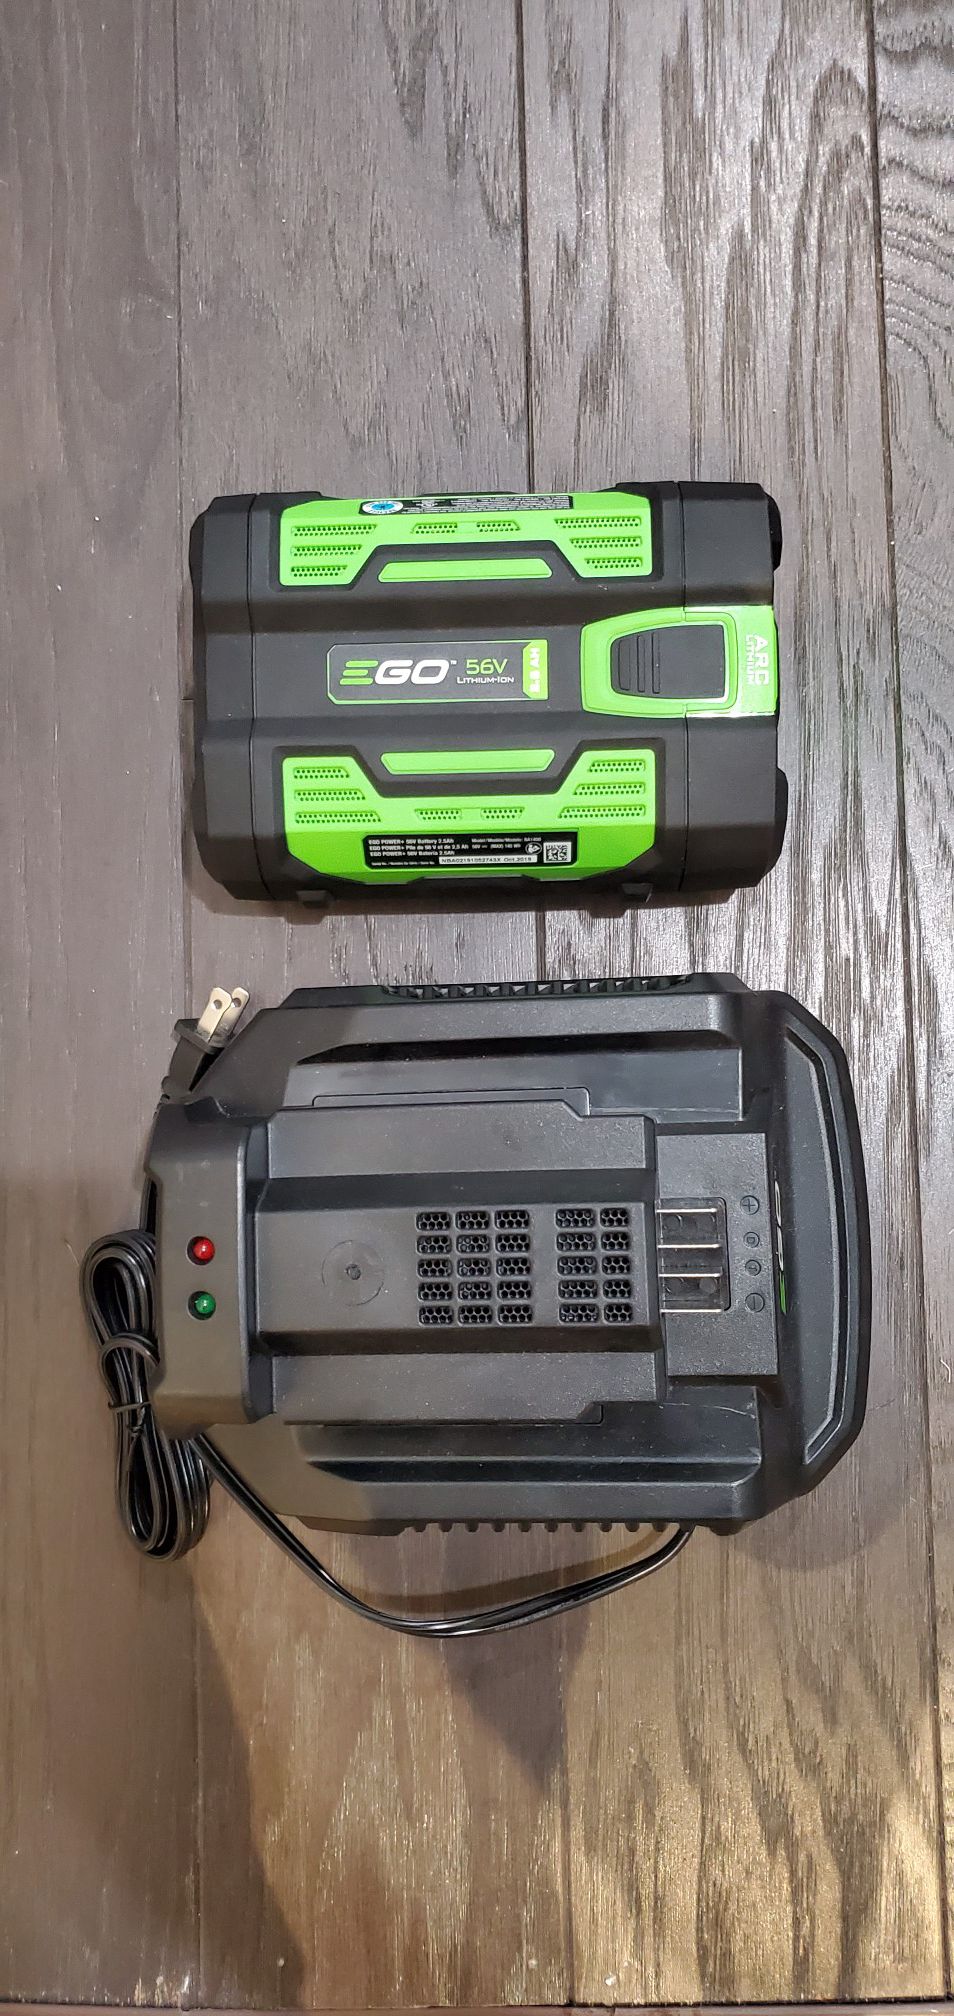 EGO 56V 2.5 AH Battery and Charger NEW!